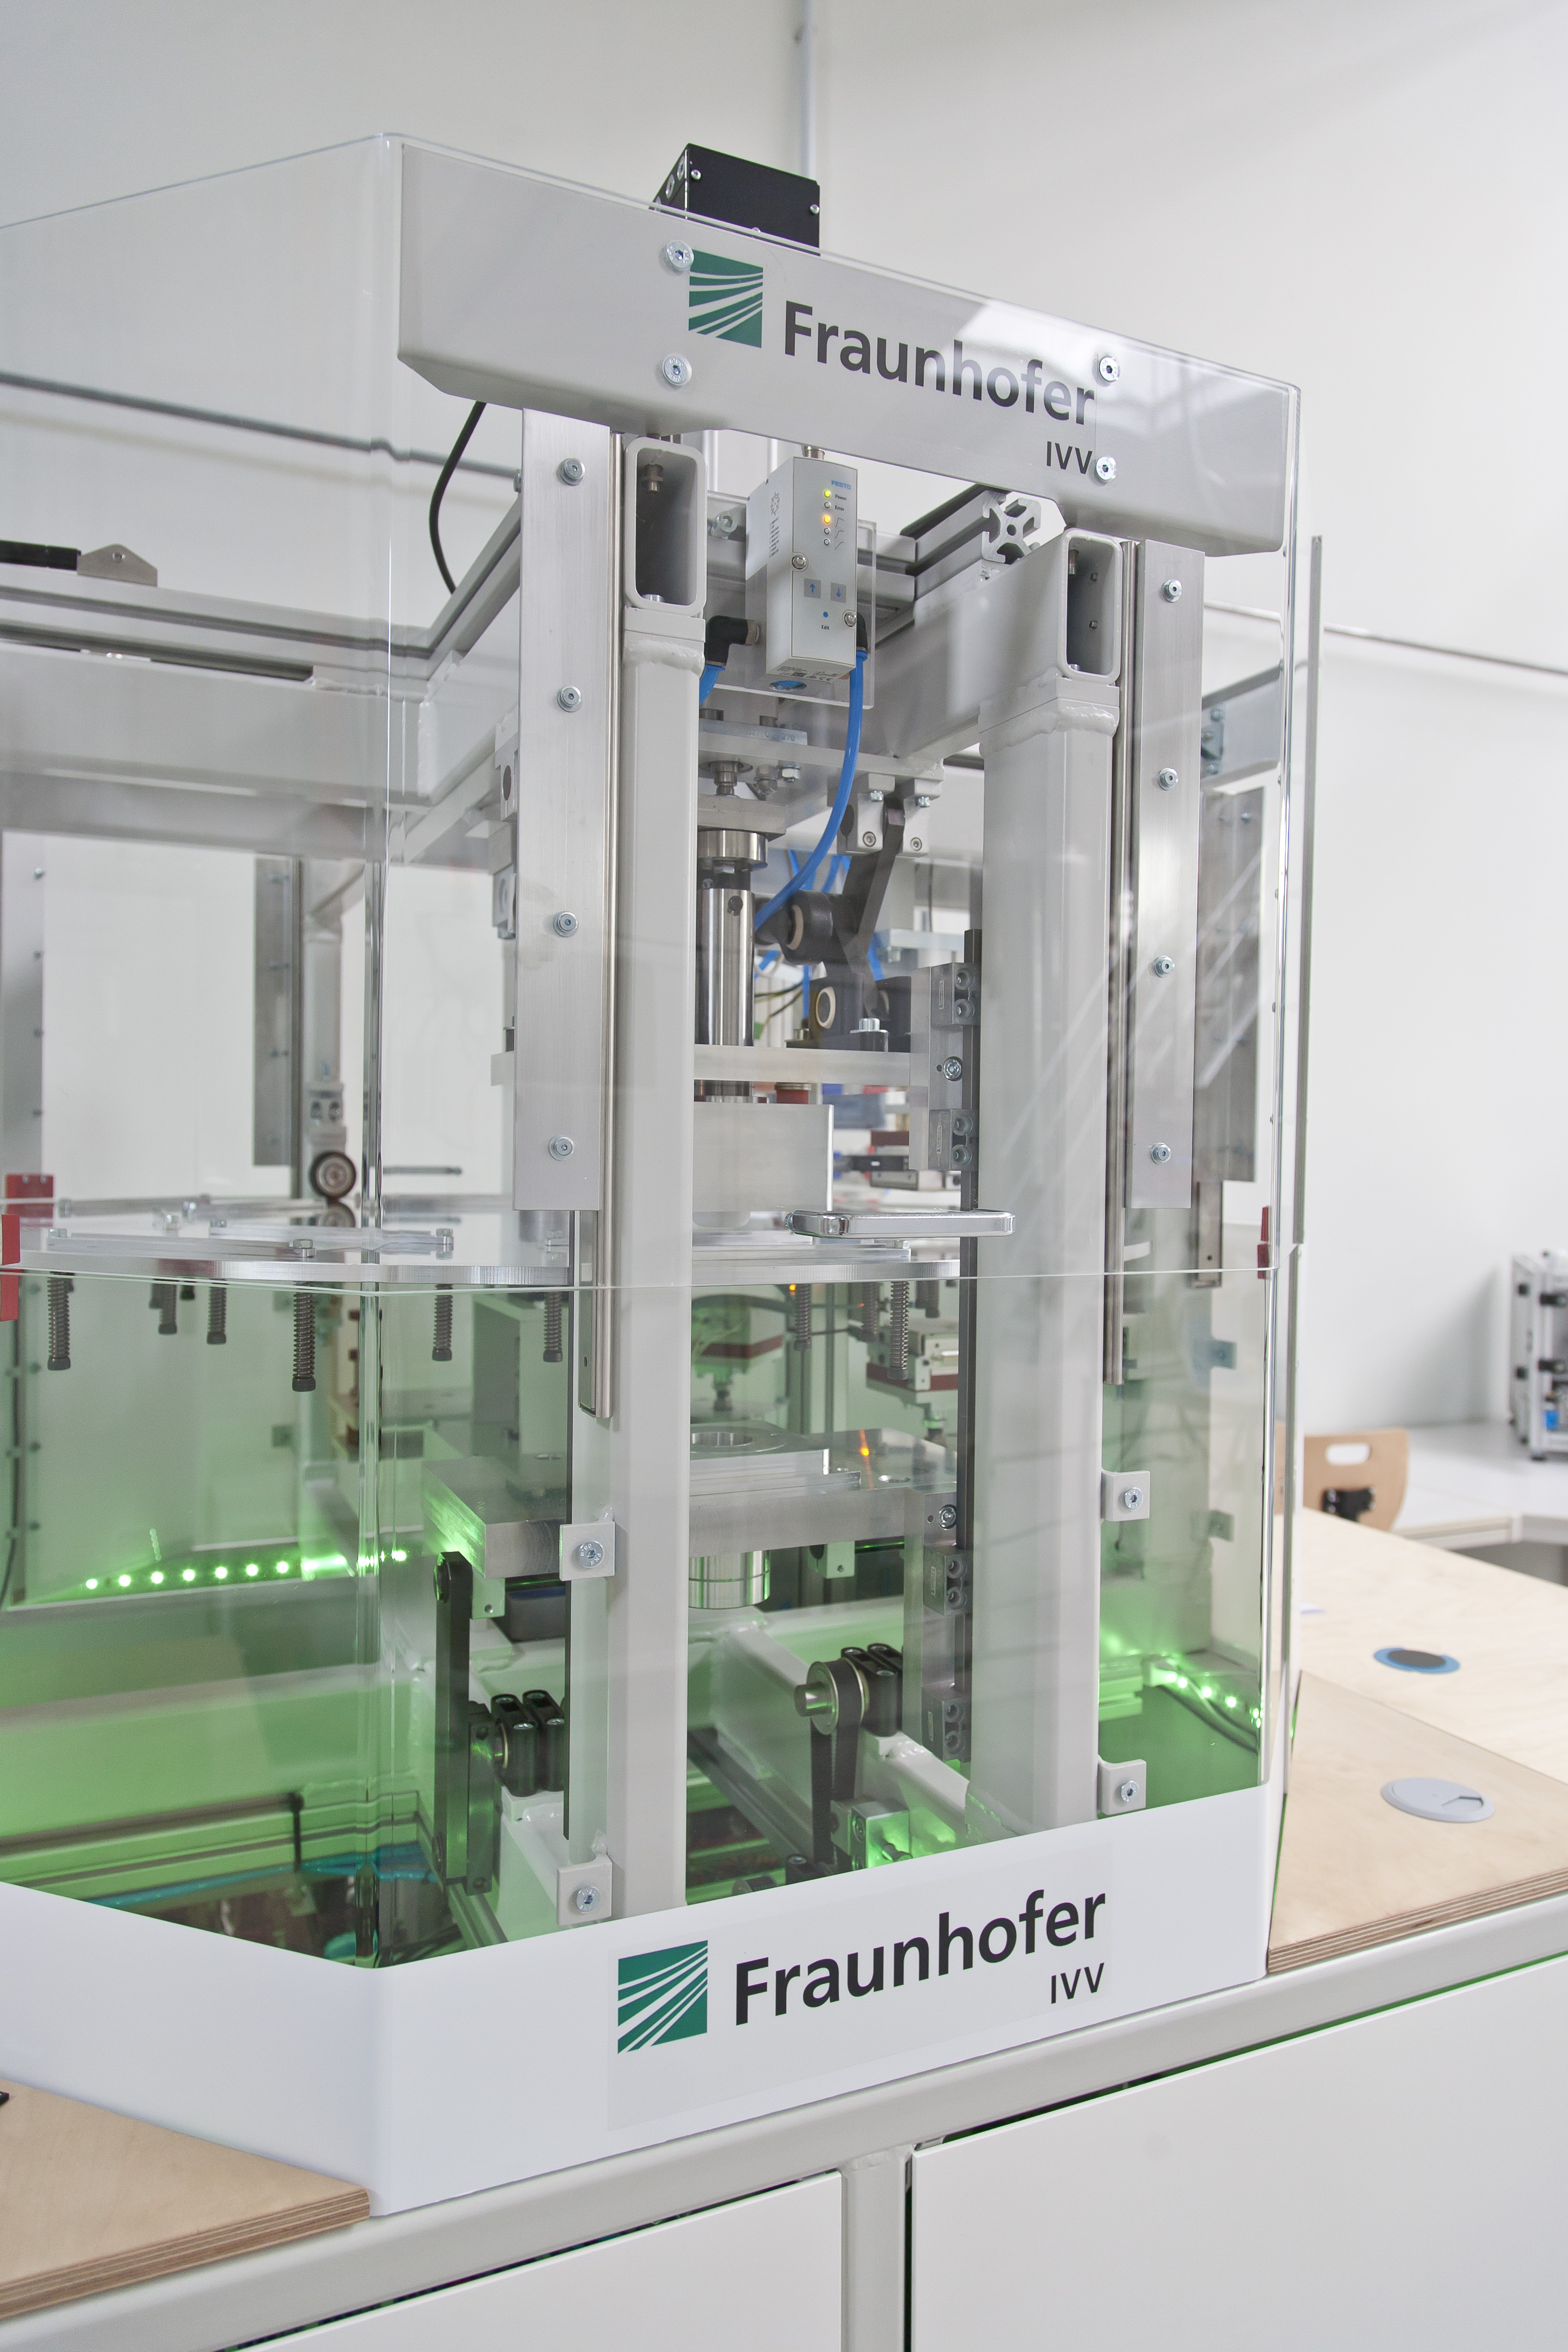 Picture of the model system for thermoformed packaging at Fraunhofer IVV in Dresden